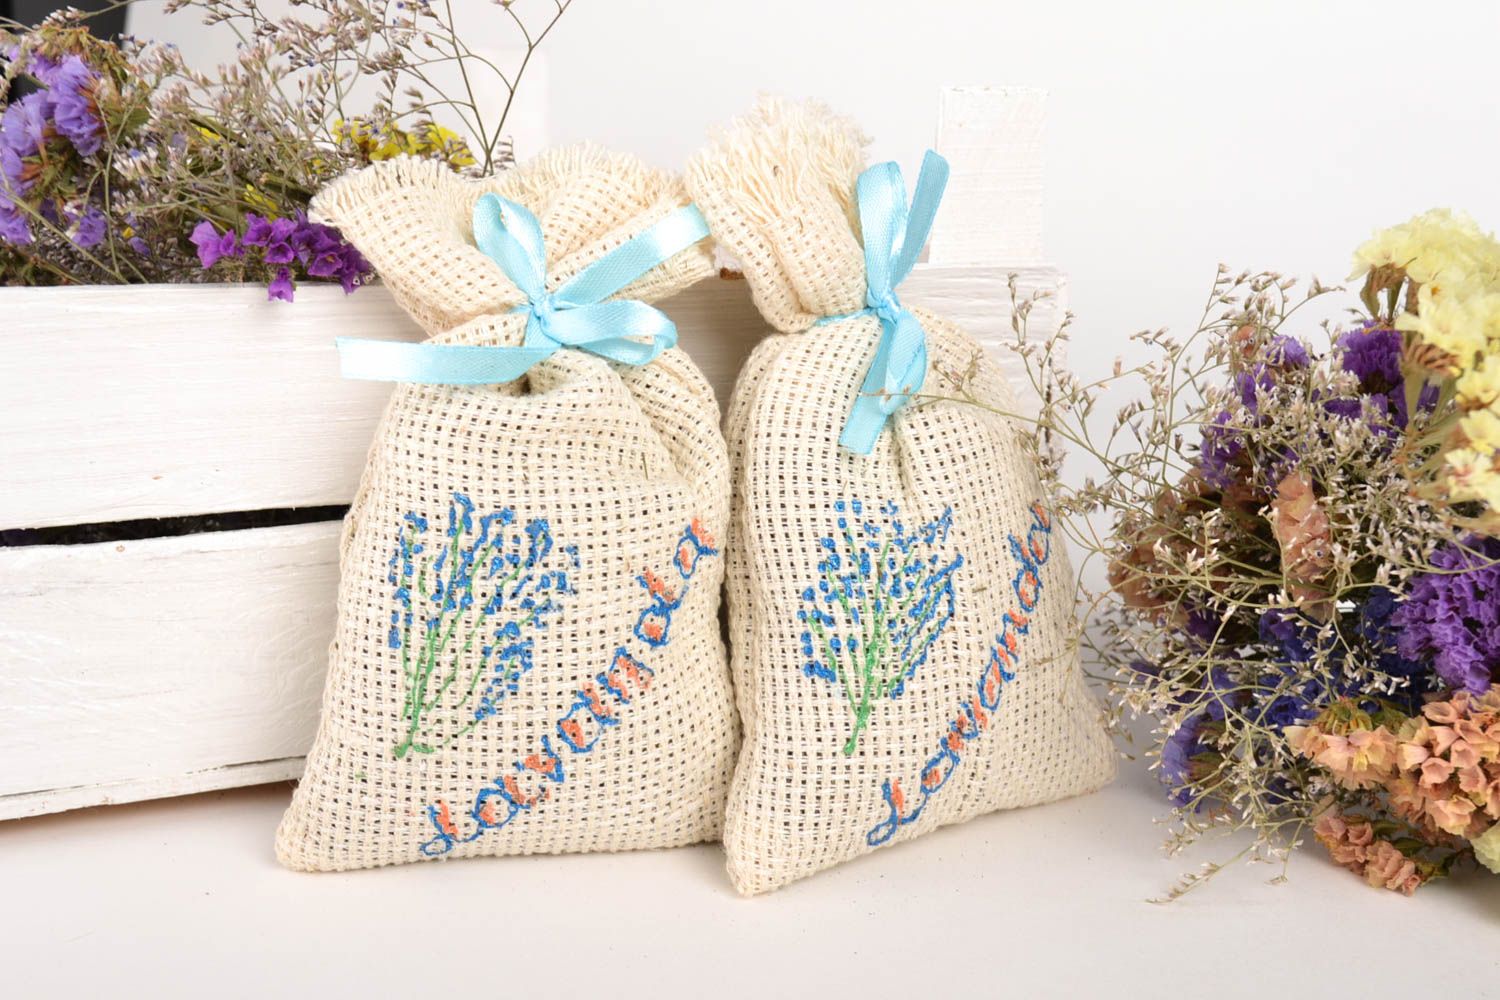 Handmade sachet bag with herbs home design aromatherapy at home small gifts photo 1